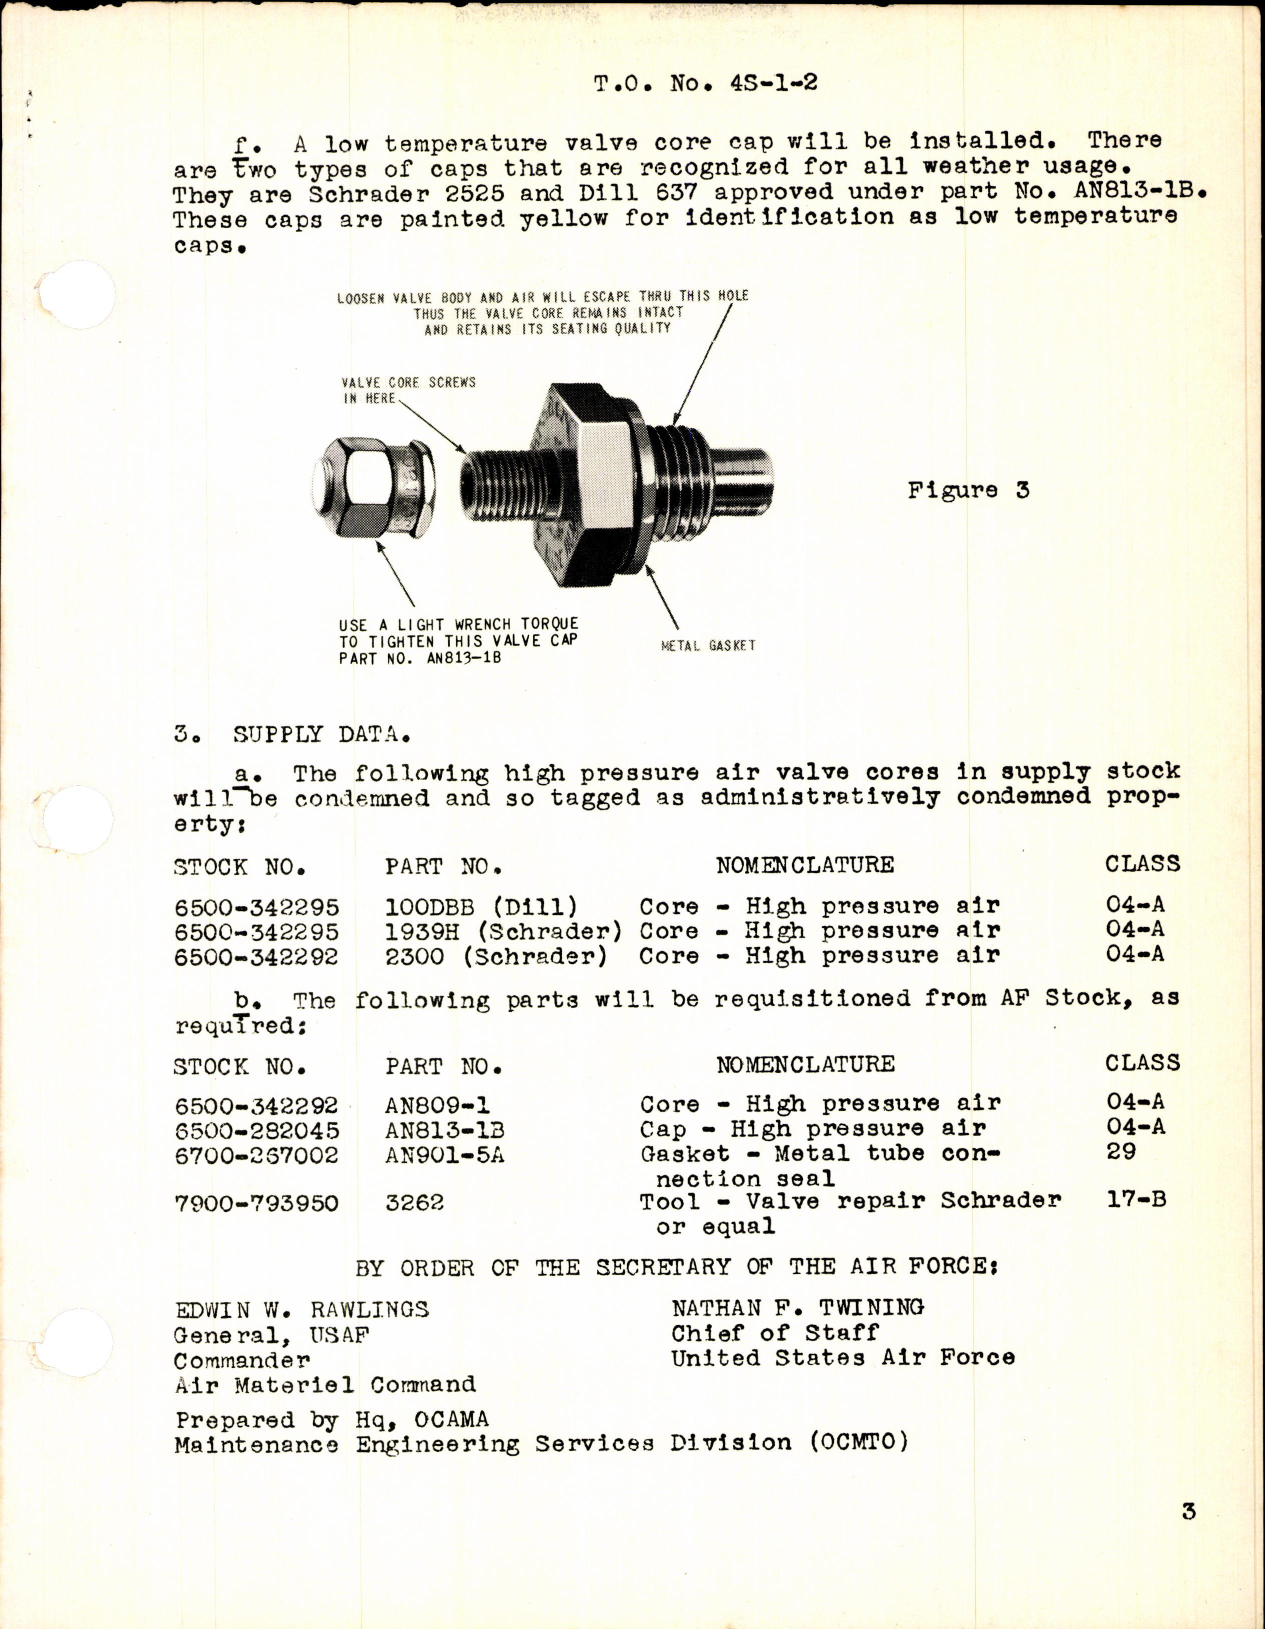 Sample page 3 from AirCorps Library document: Selection of High Pressure Air Valve Cores